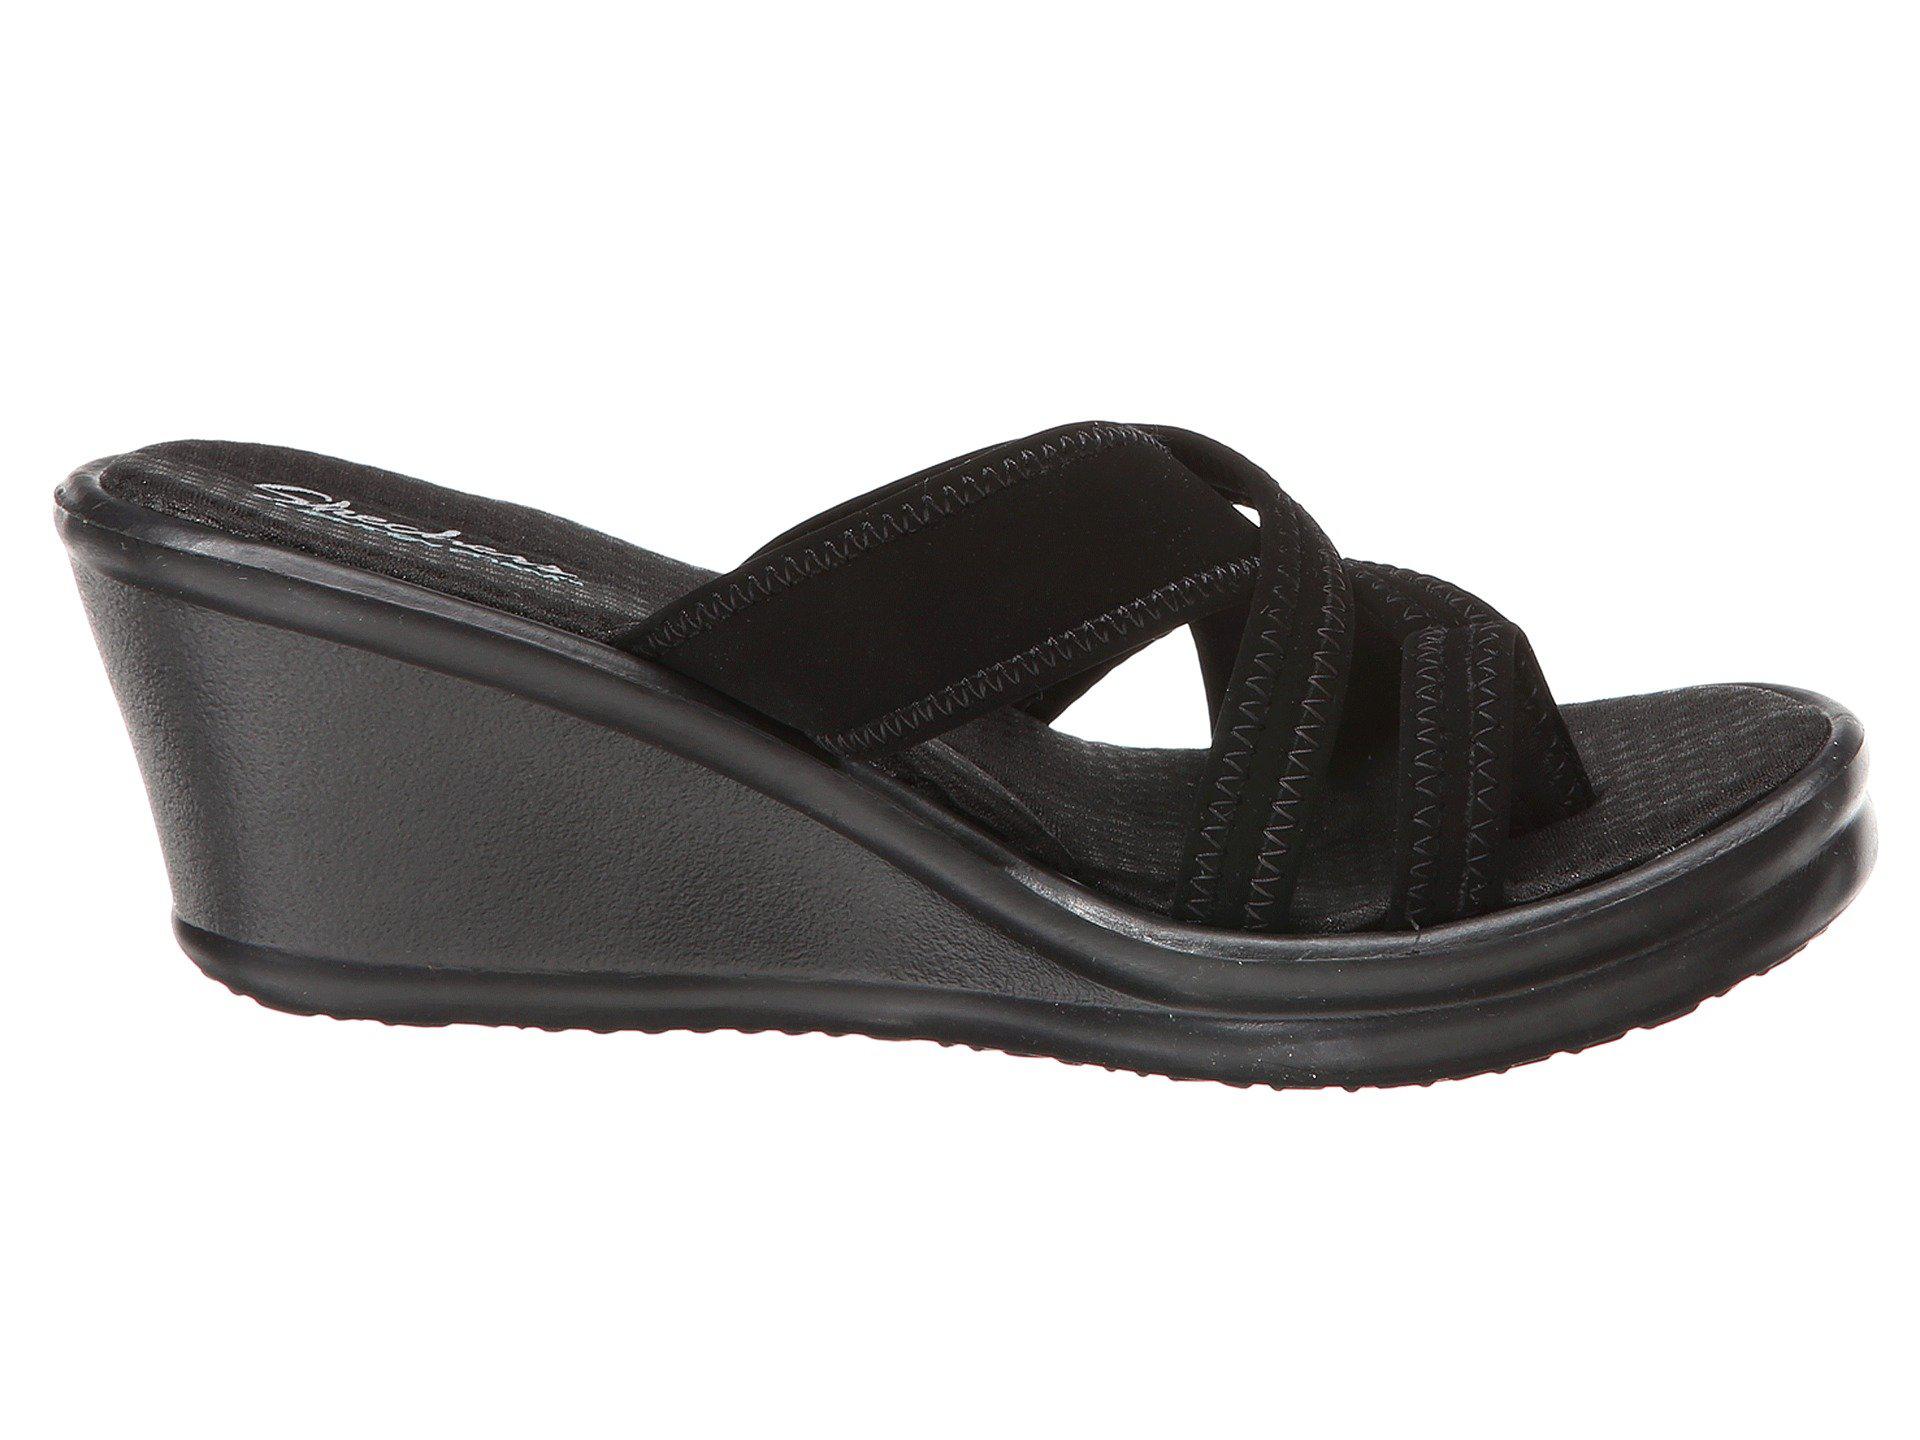 Lyst - Skechers Rumblers Young At Heart (black) Women's Sandals in Black